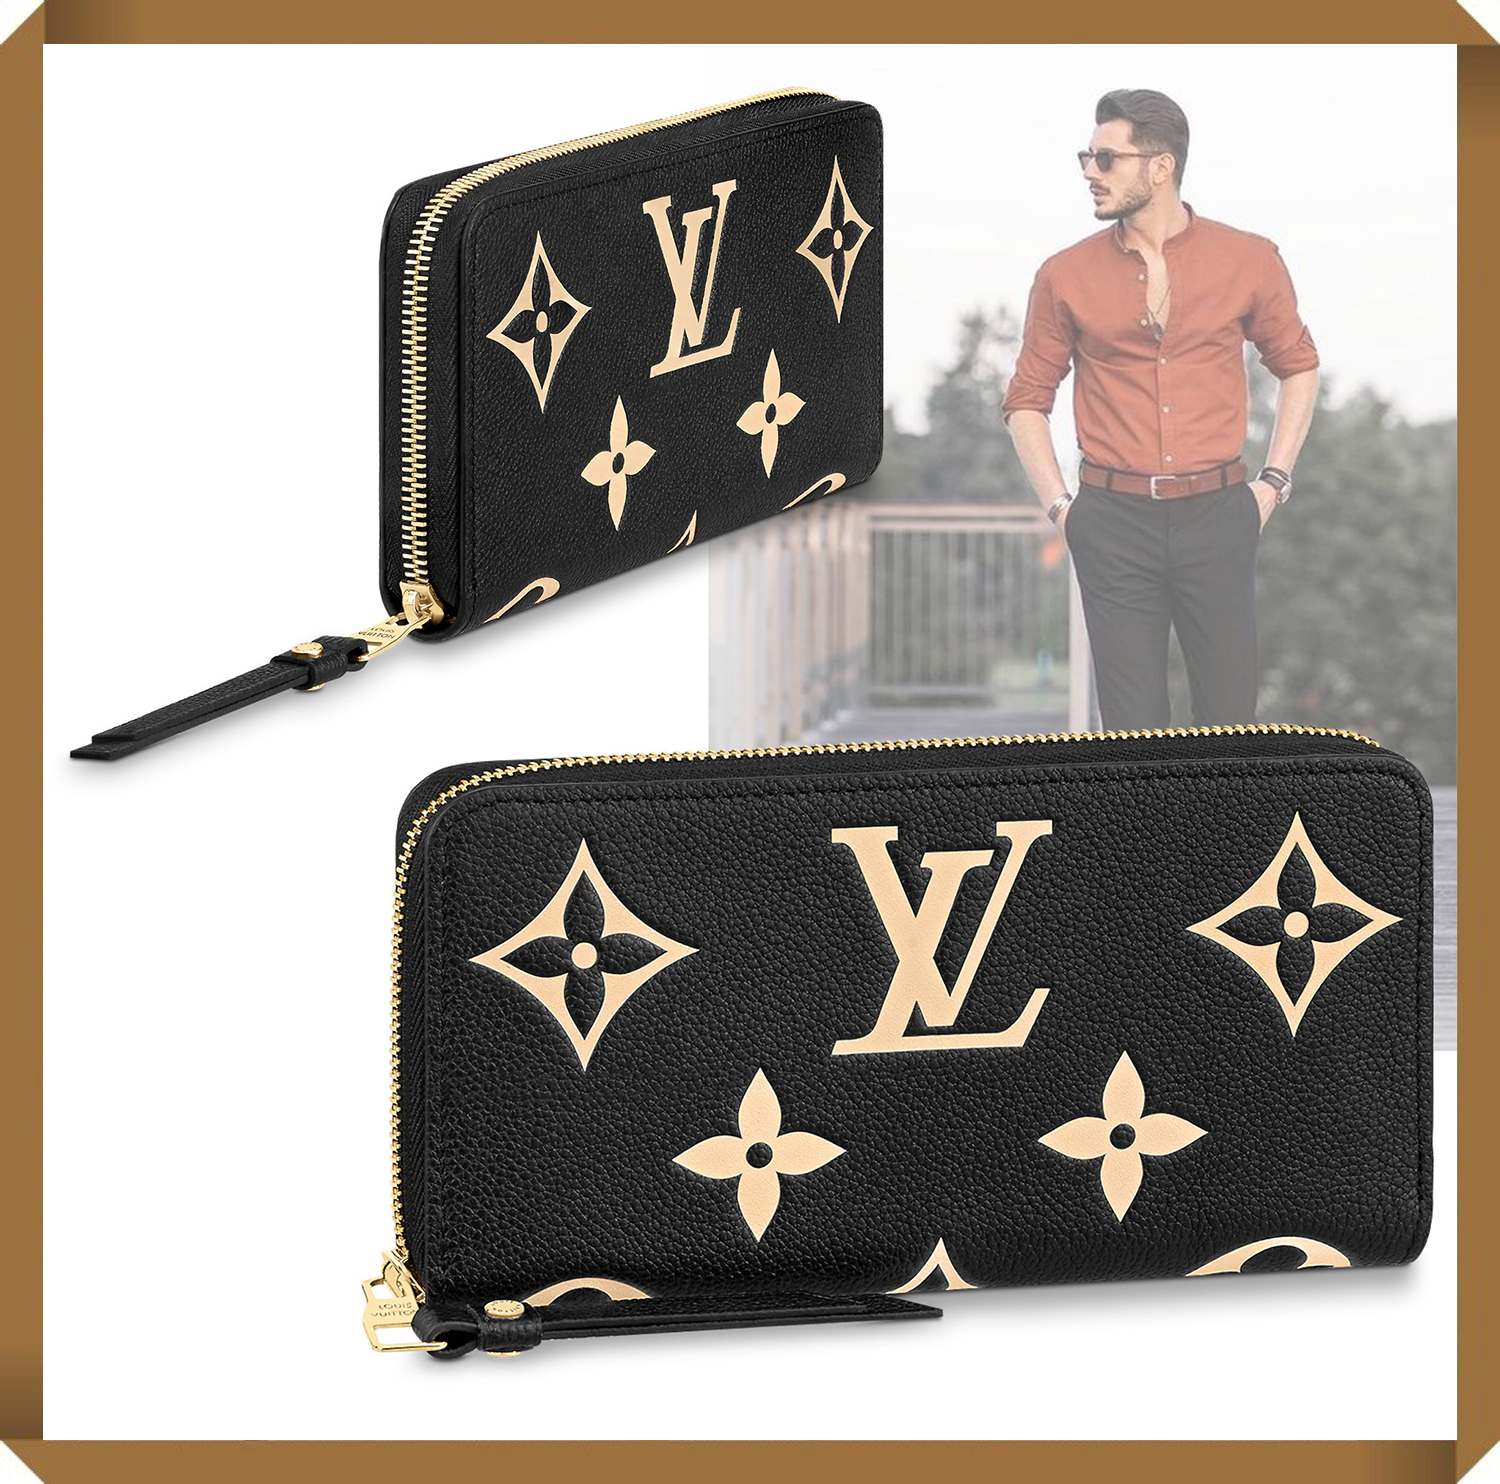 LOUIS VUITTON（ルイヴィトン）ジッピー・ウォレット